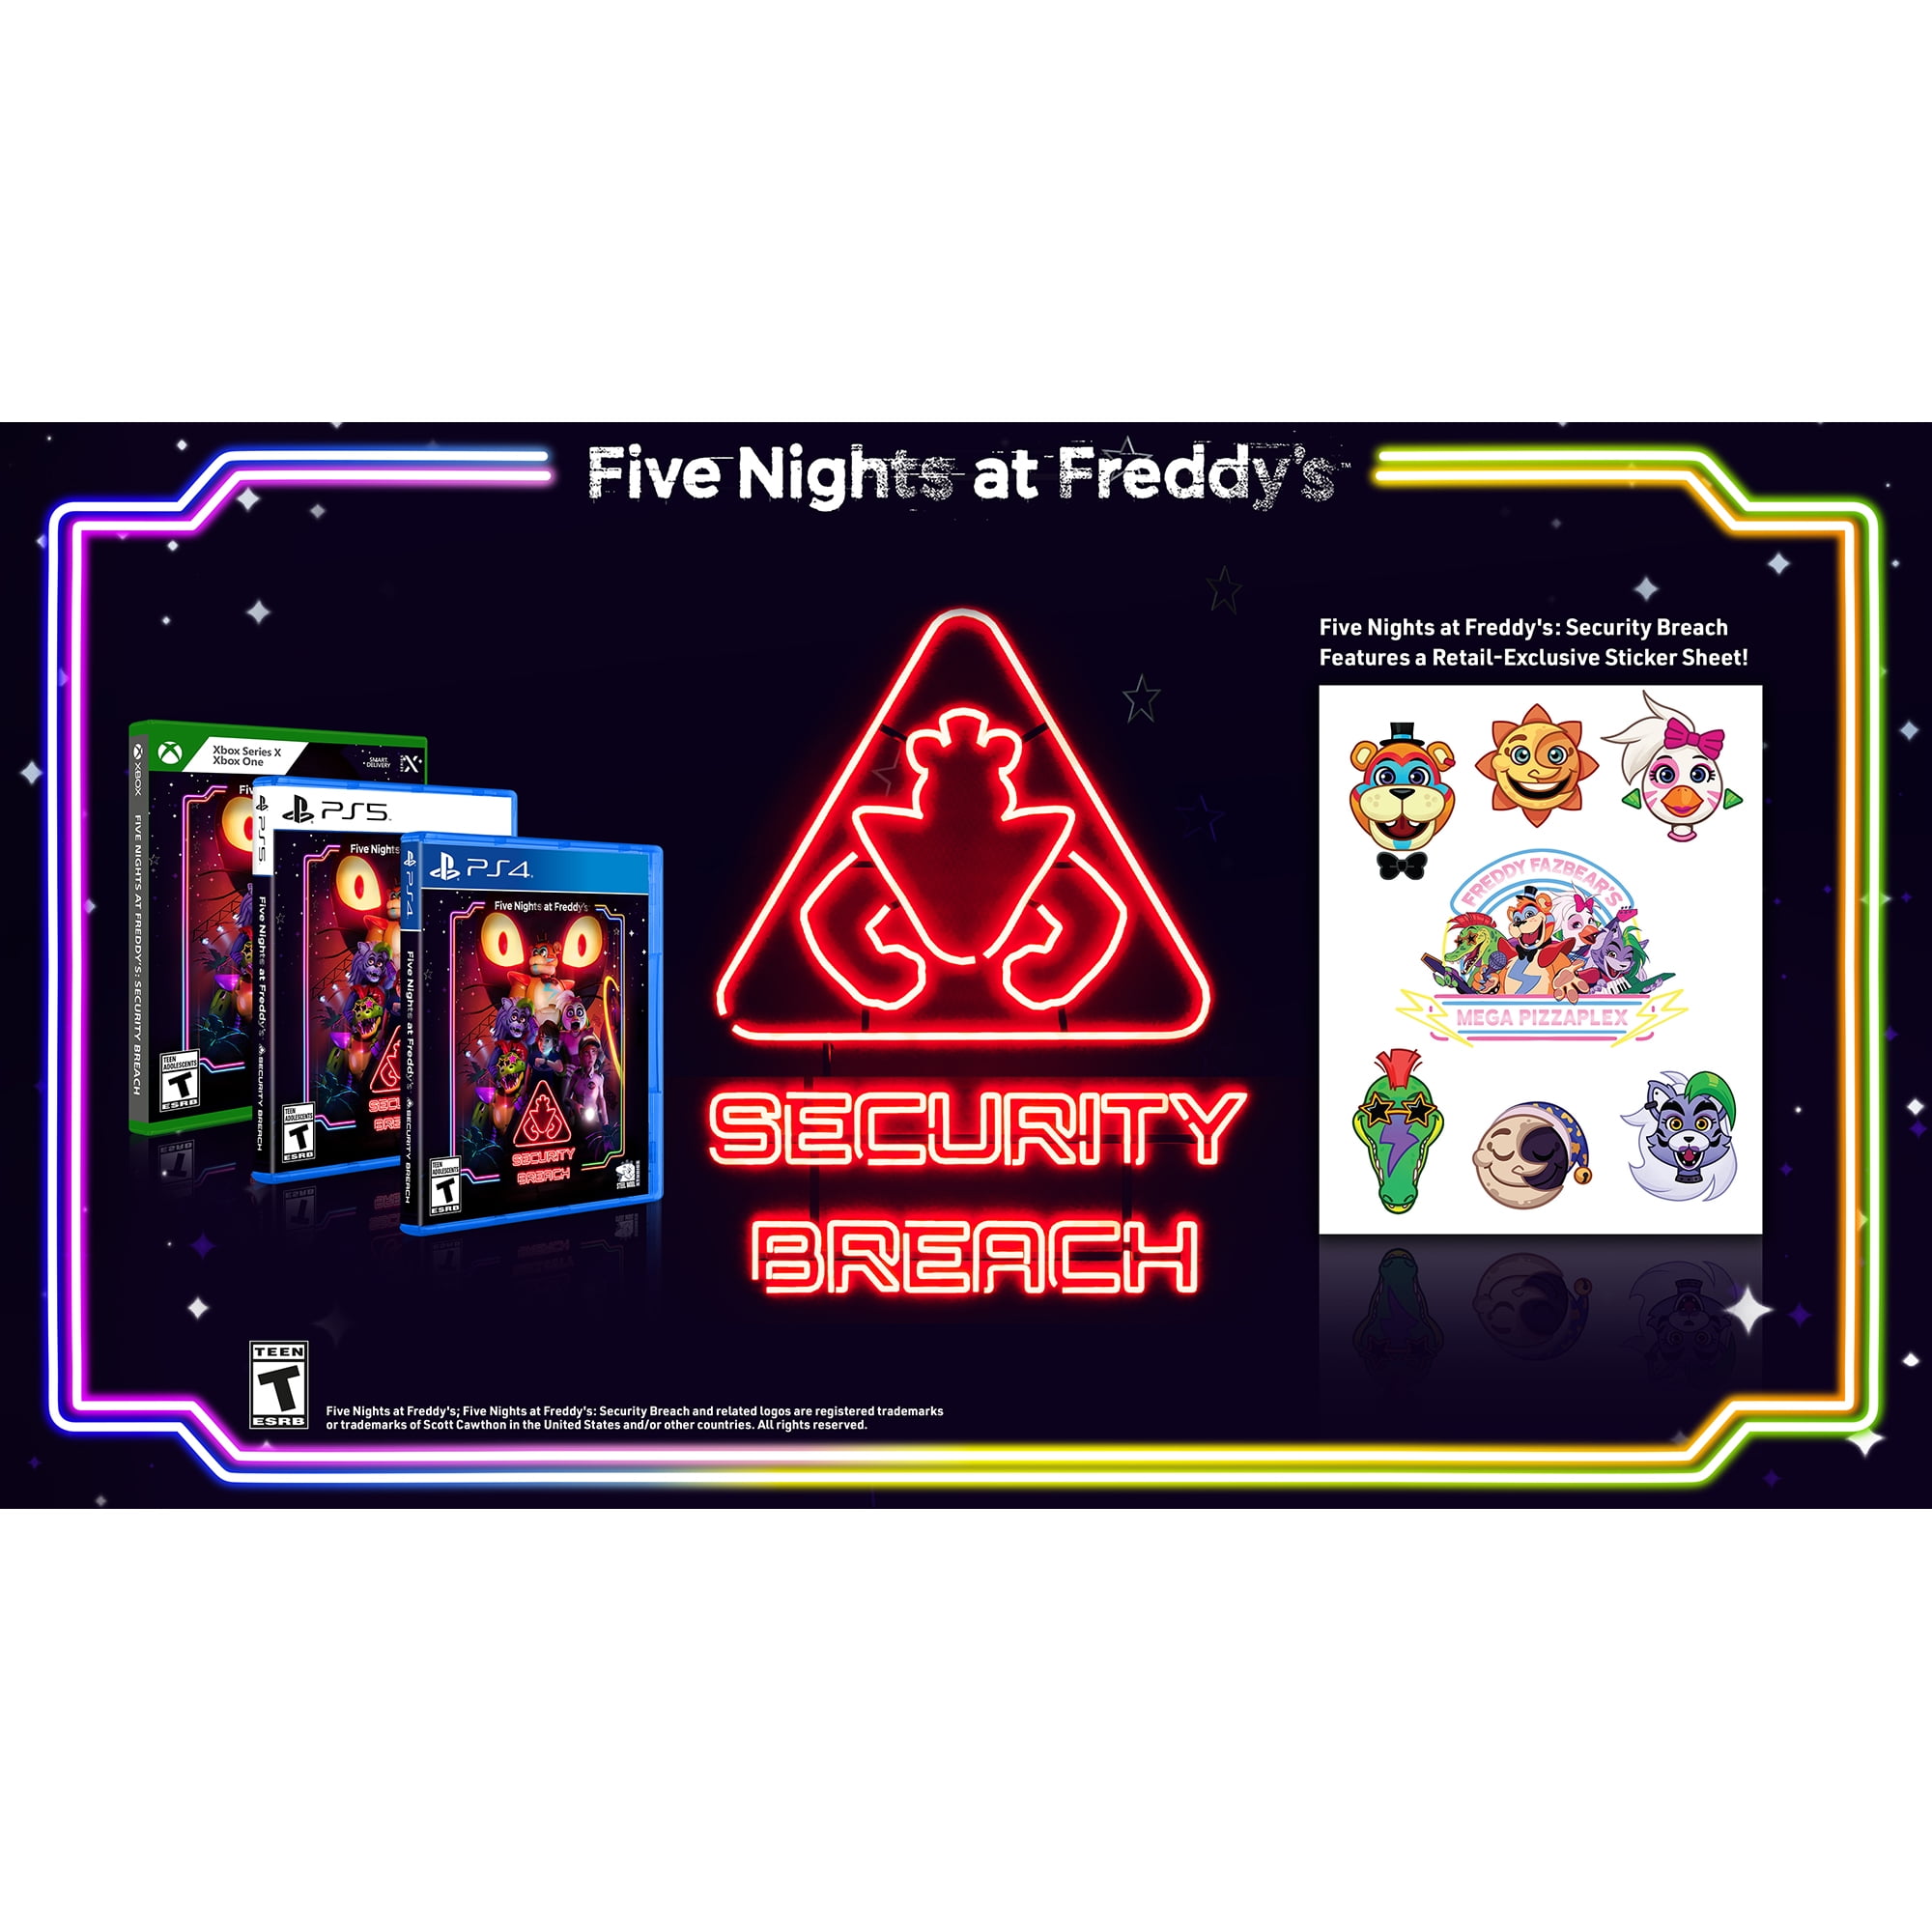  Five Nights at Freddy's: Security Breach (XSX) Collector's  Edition : Movies & TV